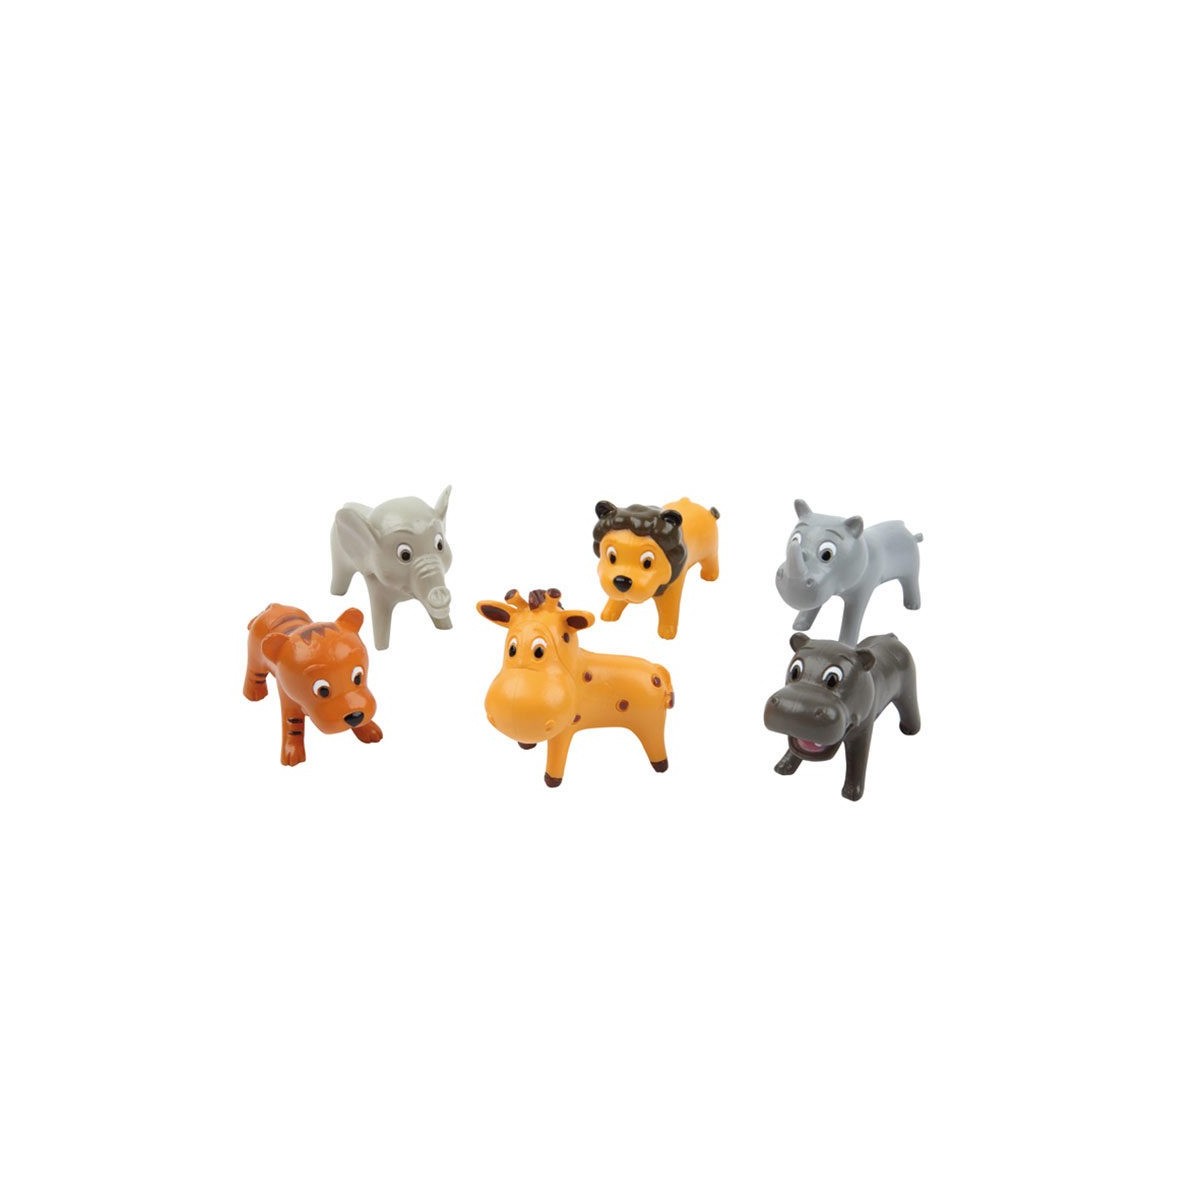 70233  FIGURINE ANIMAUX SAUVAGES 36PCES S/CDE